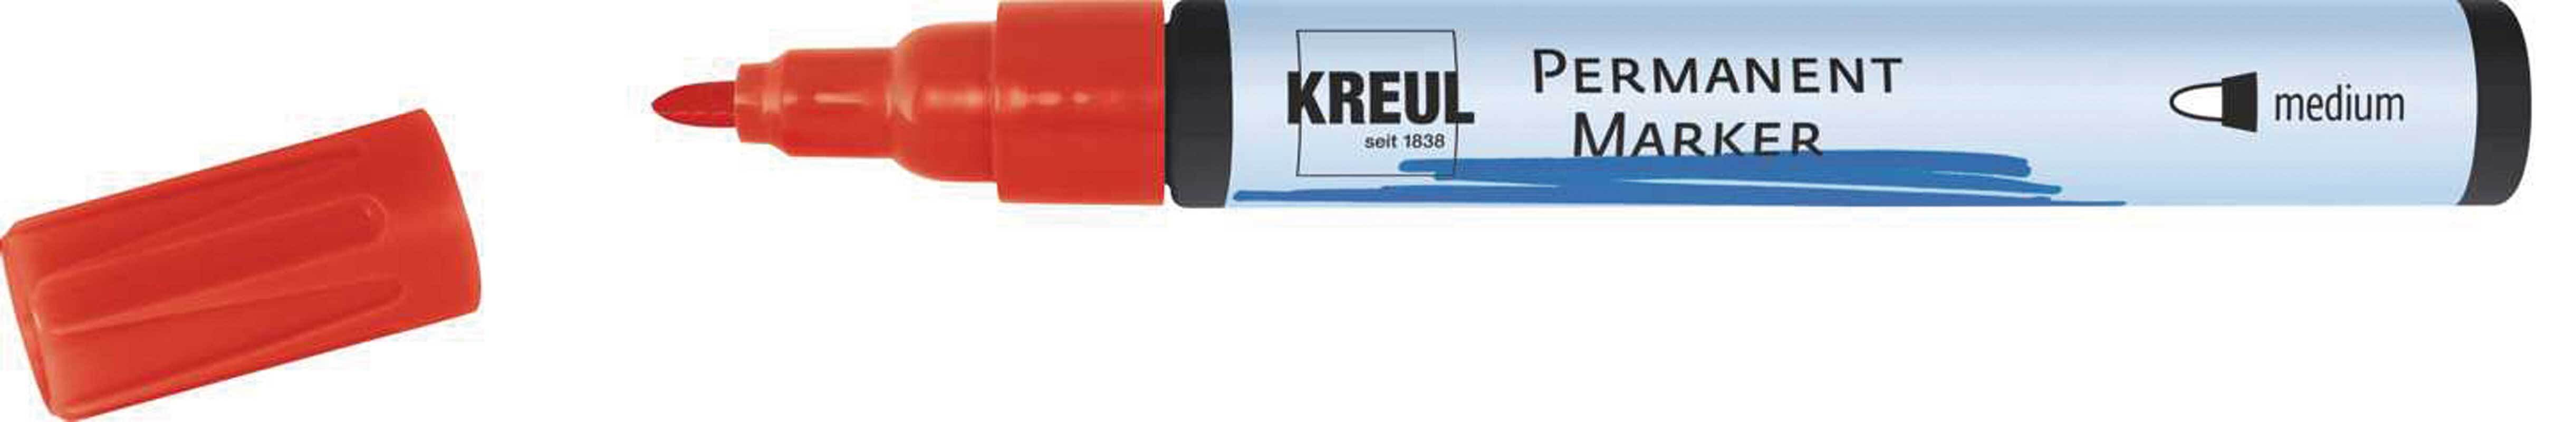 Permanent Marker - 1,5 - 3 mm, rood